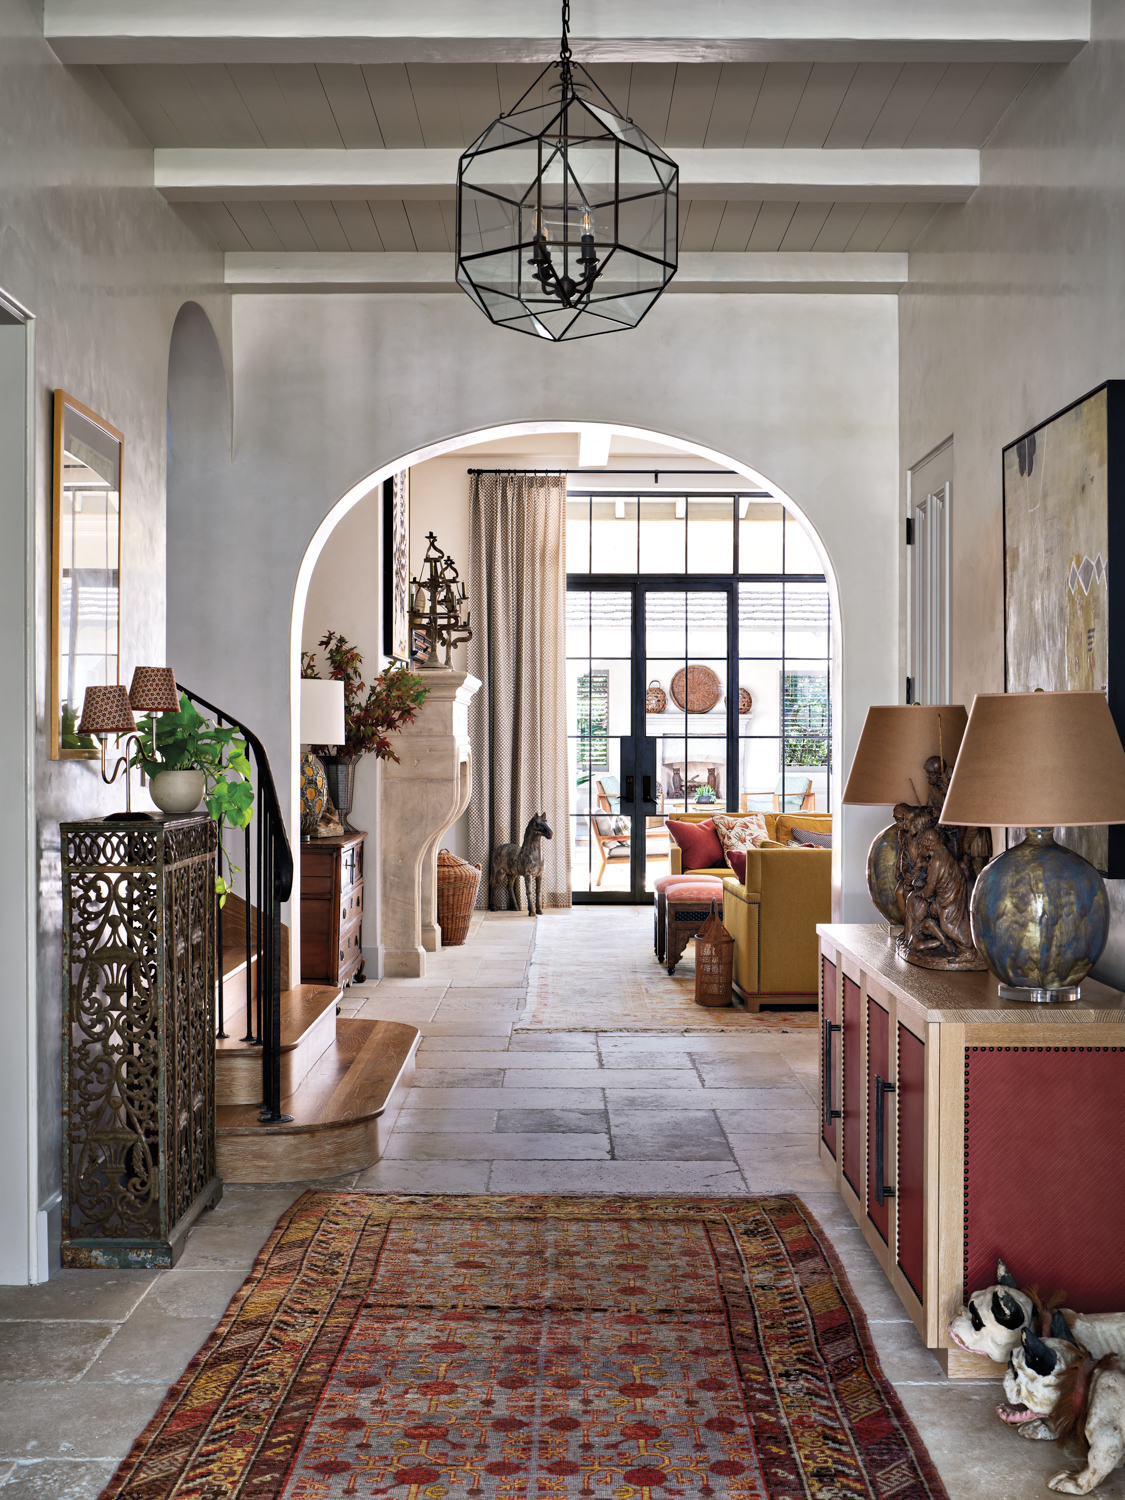 Entry featuring eclectic furnishings like...